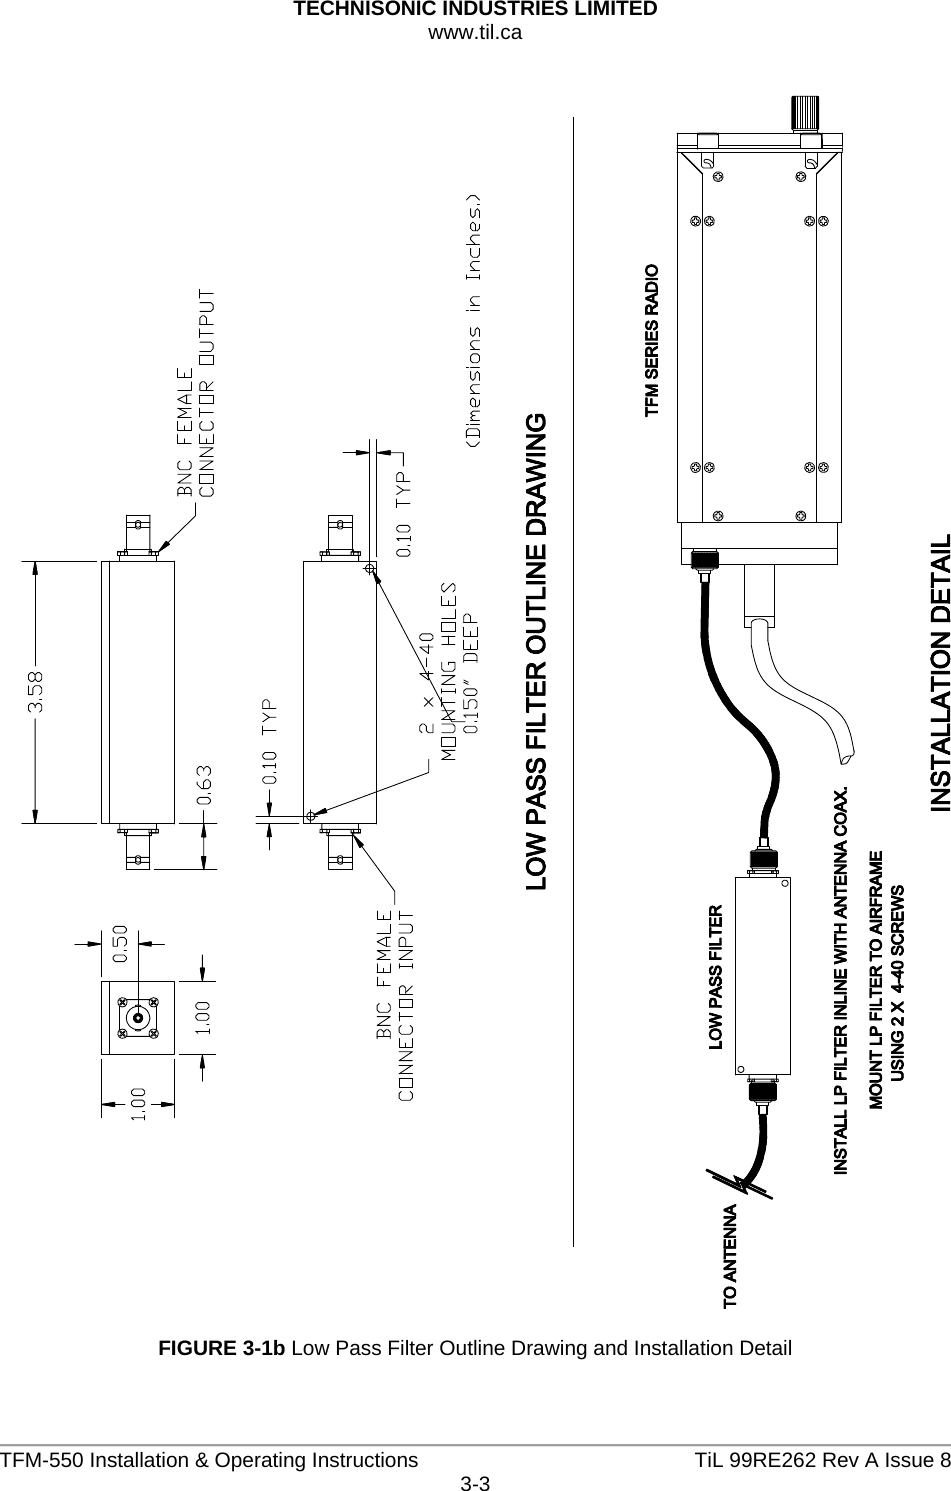 TECHNISONIC INDUSTRIES LIMITED www.til.ca   TFM-550 Installation &amp; Operating Instructions  TiL 99RE262 Rev A Issue 83-3    FIGURE 3-1b Low Pass Filter Outline Drawing and Installation Detail  